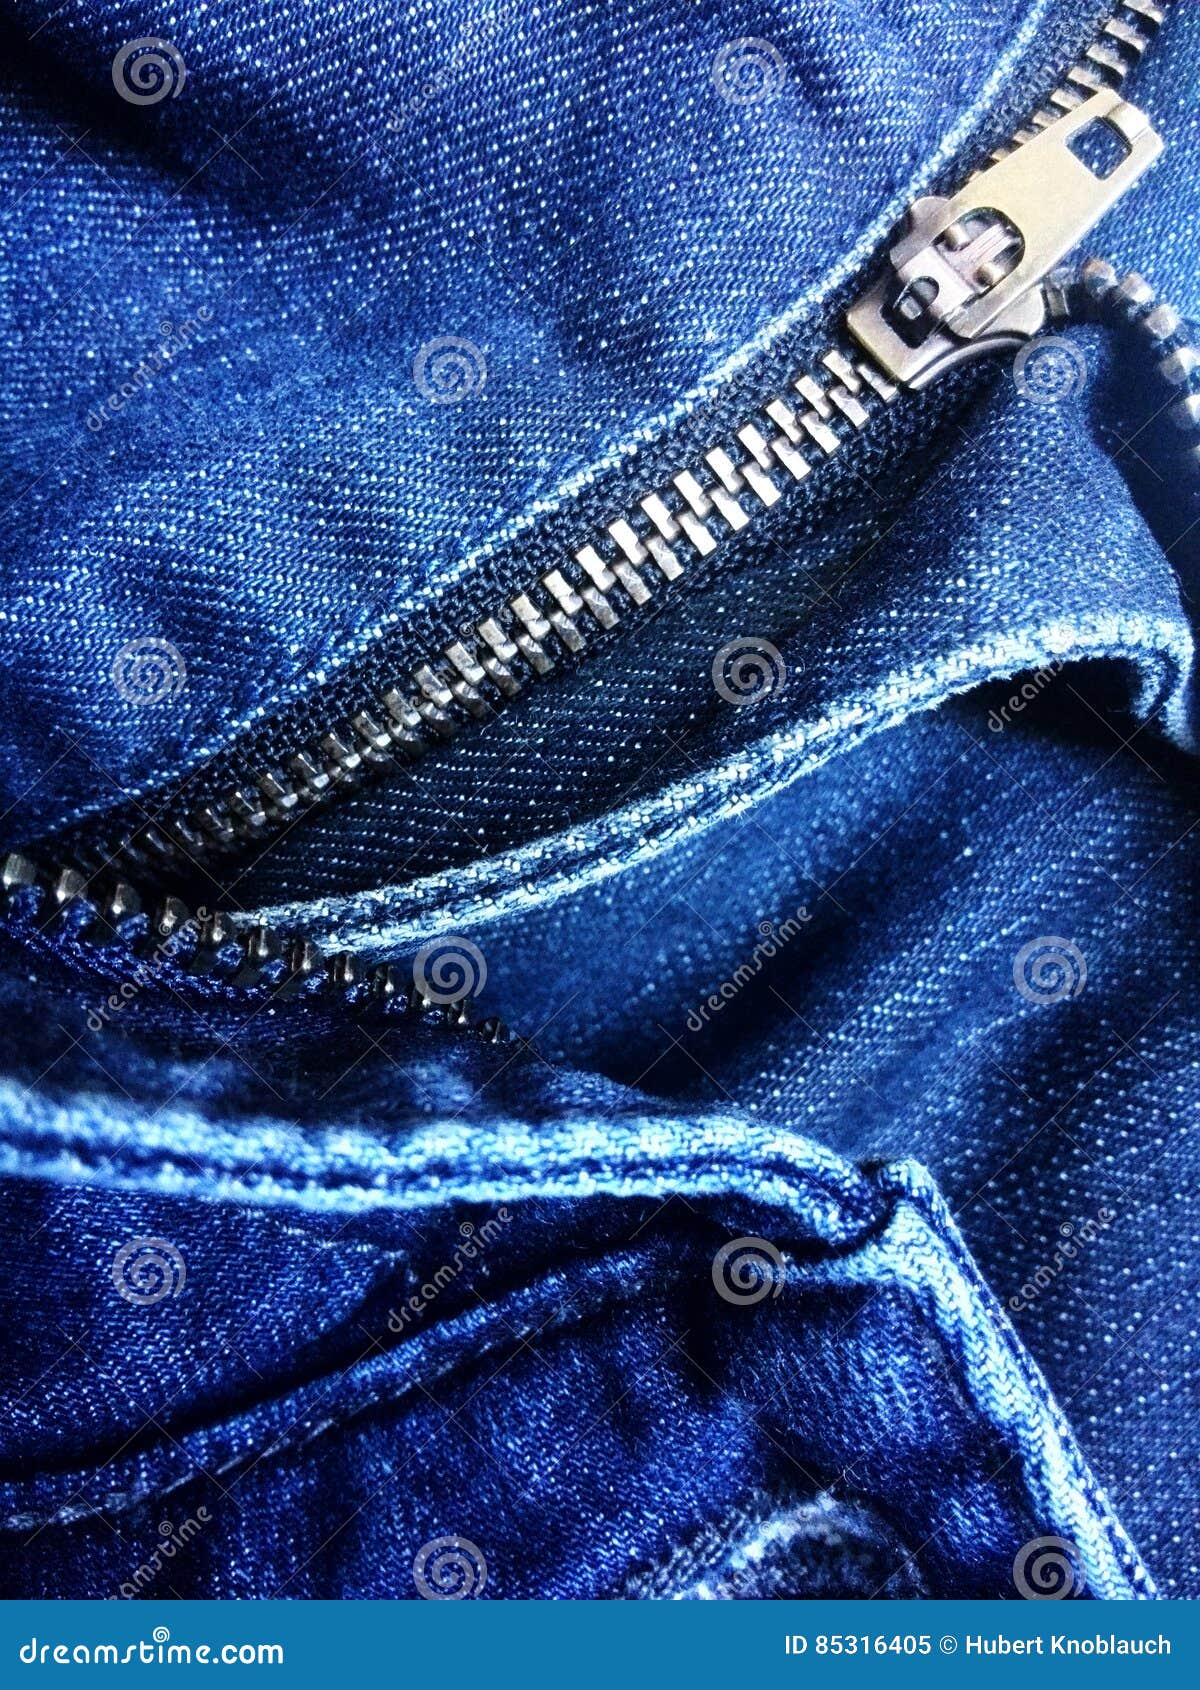 Jeans and Denim Clothing Items with Focus on Zipper Stock Image - Image ...